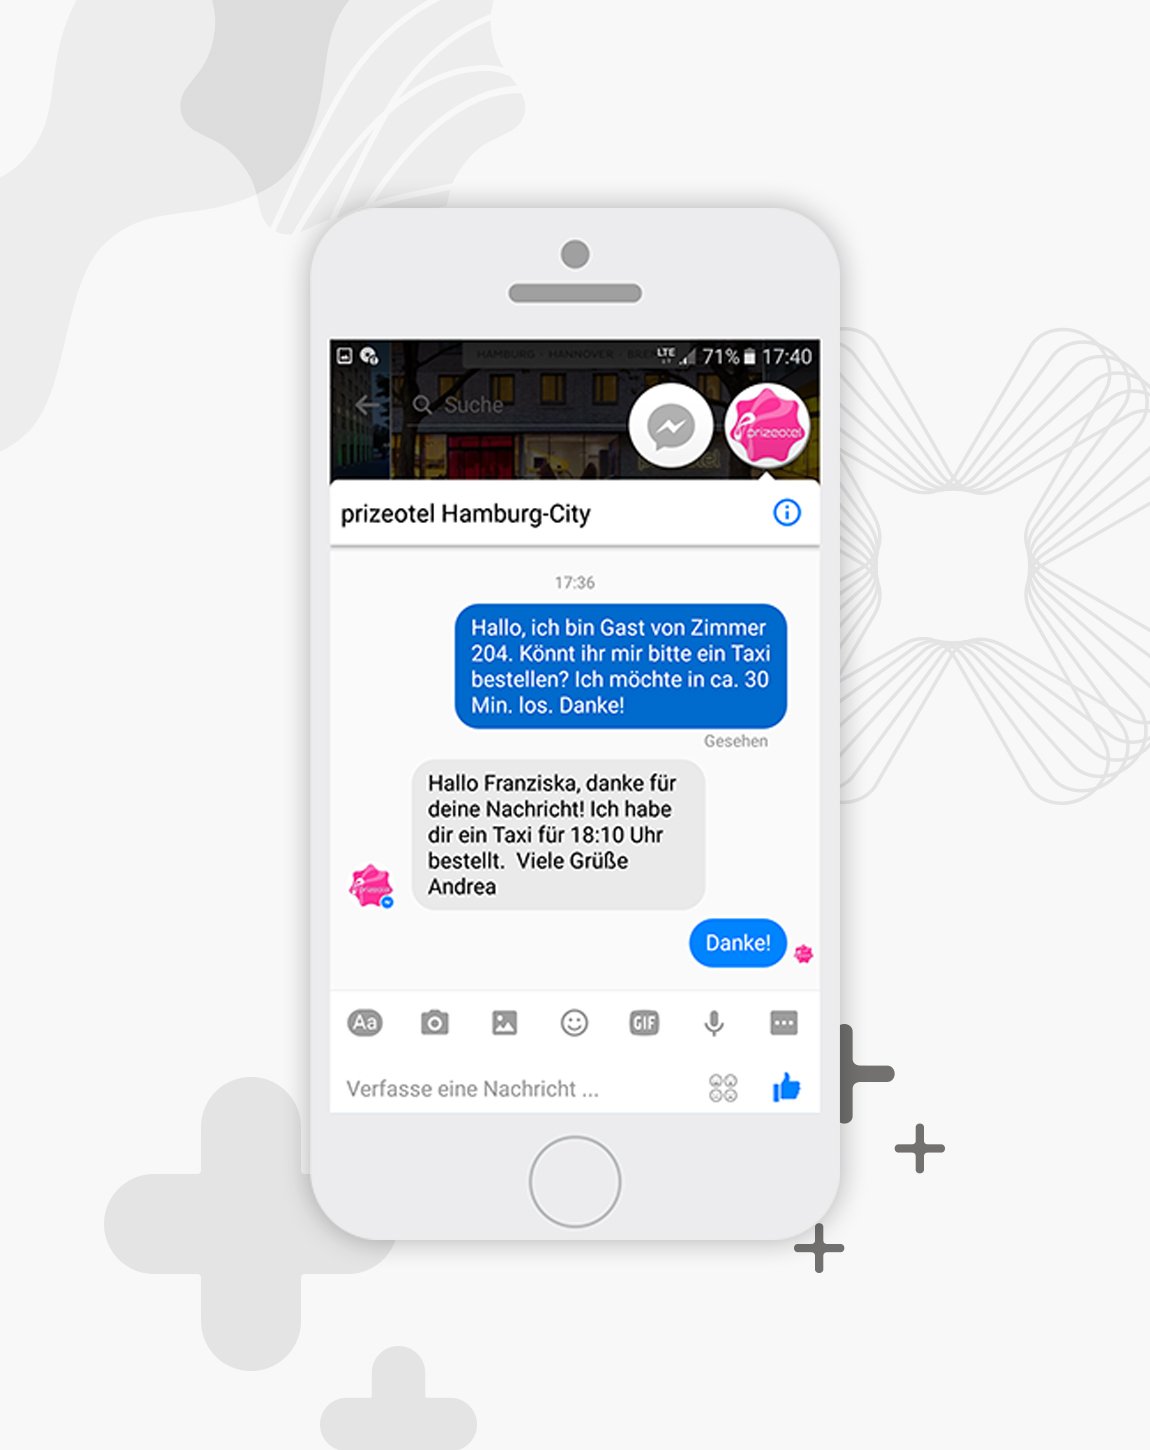 A screenshot shows the possibility to contact with prizeotels via Facebook Messenger chat